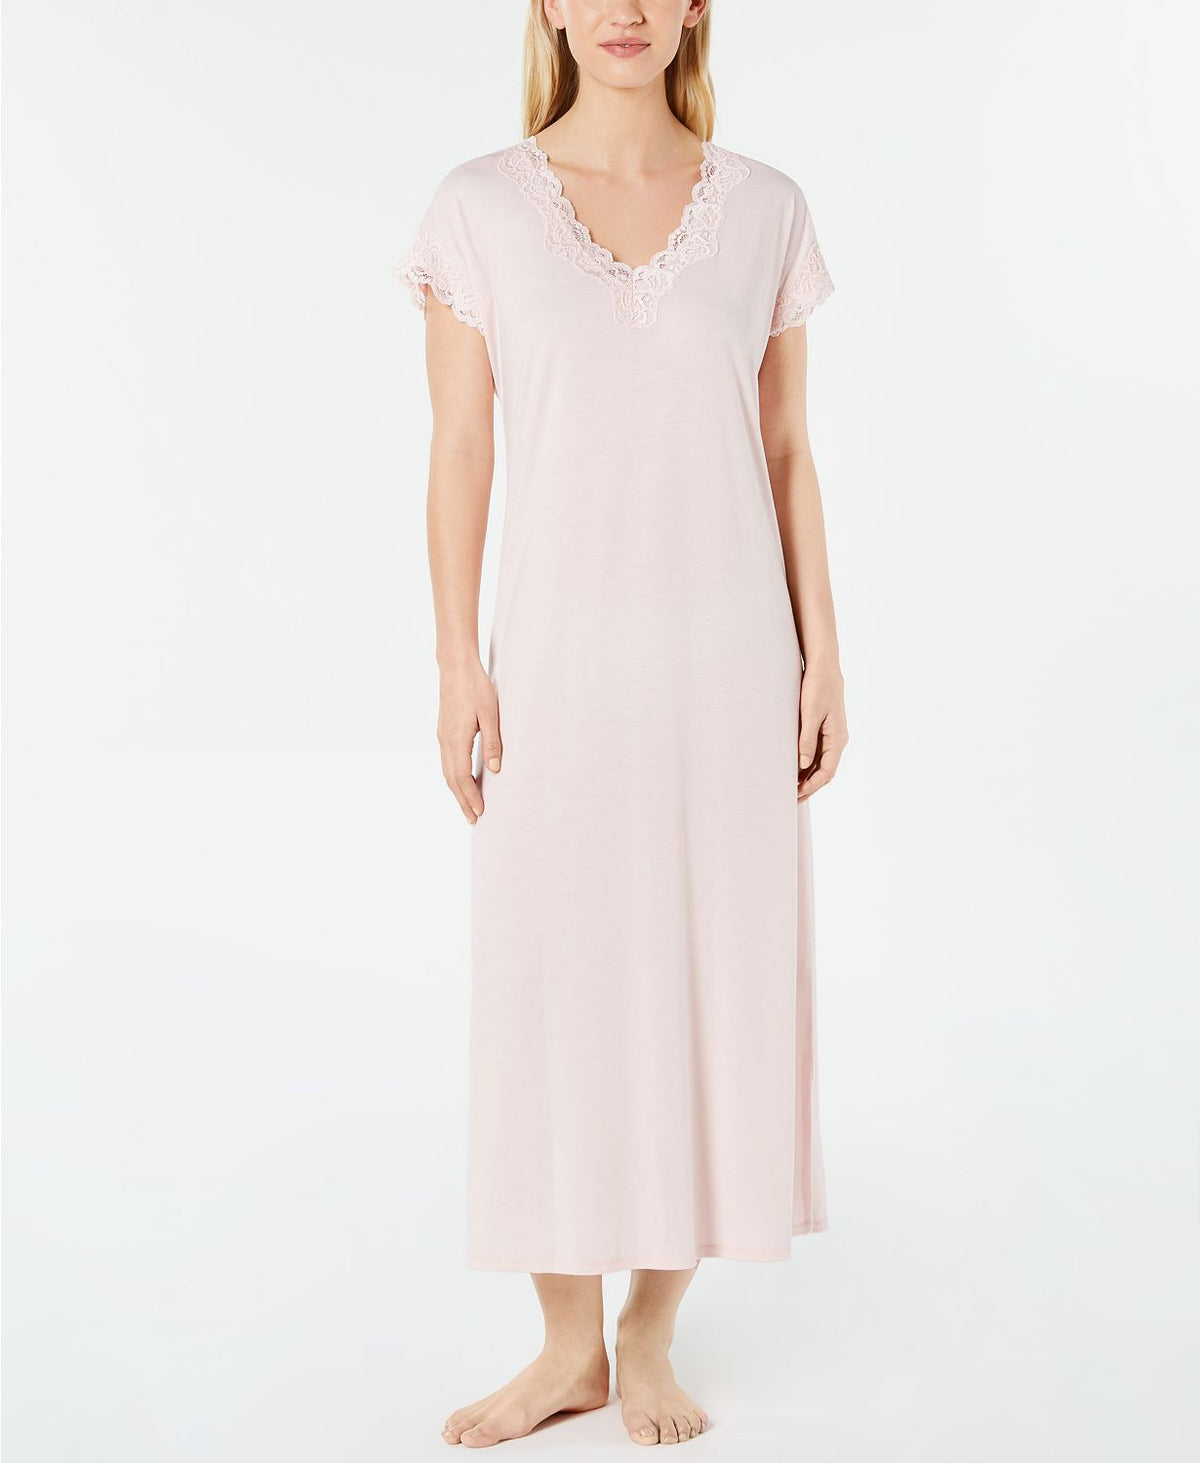 Charter Club Lace Trimmed Soft Modal Knit Nightgown in Potpourri